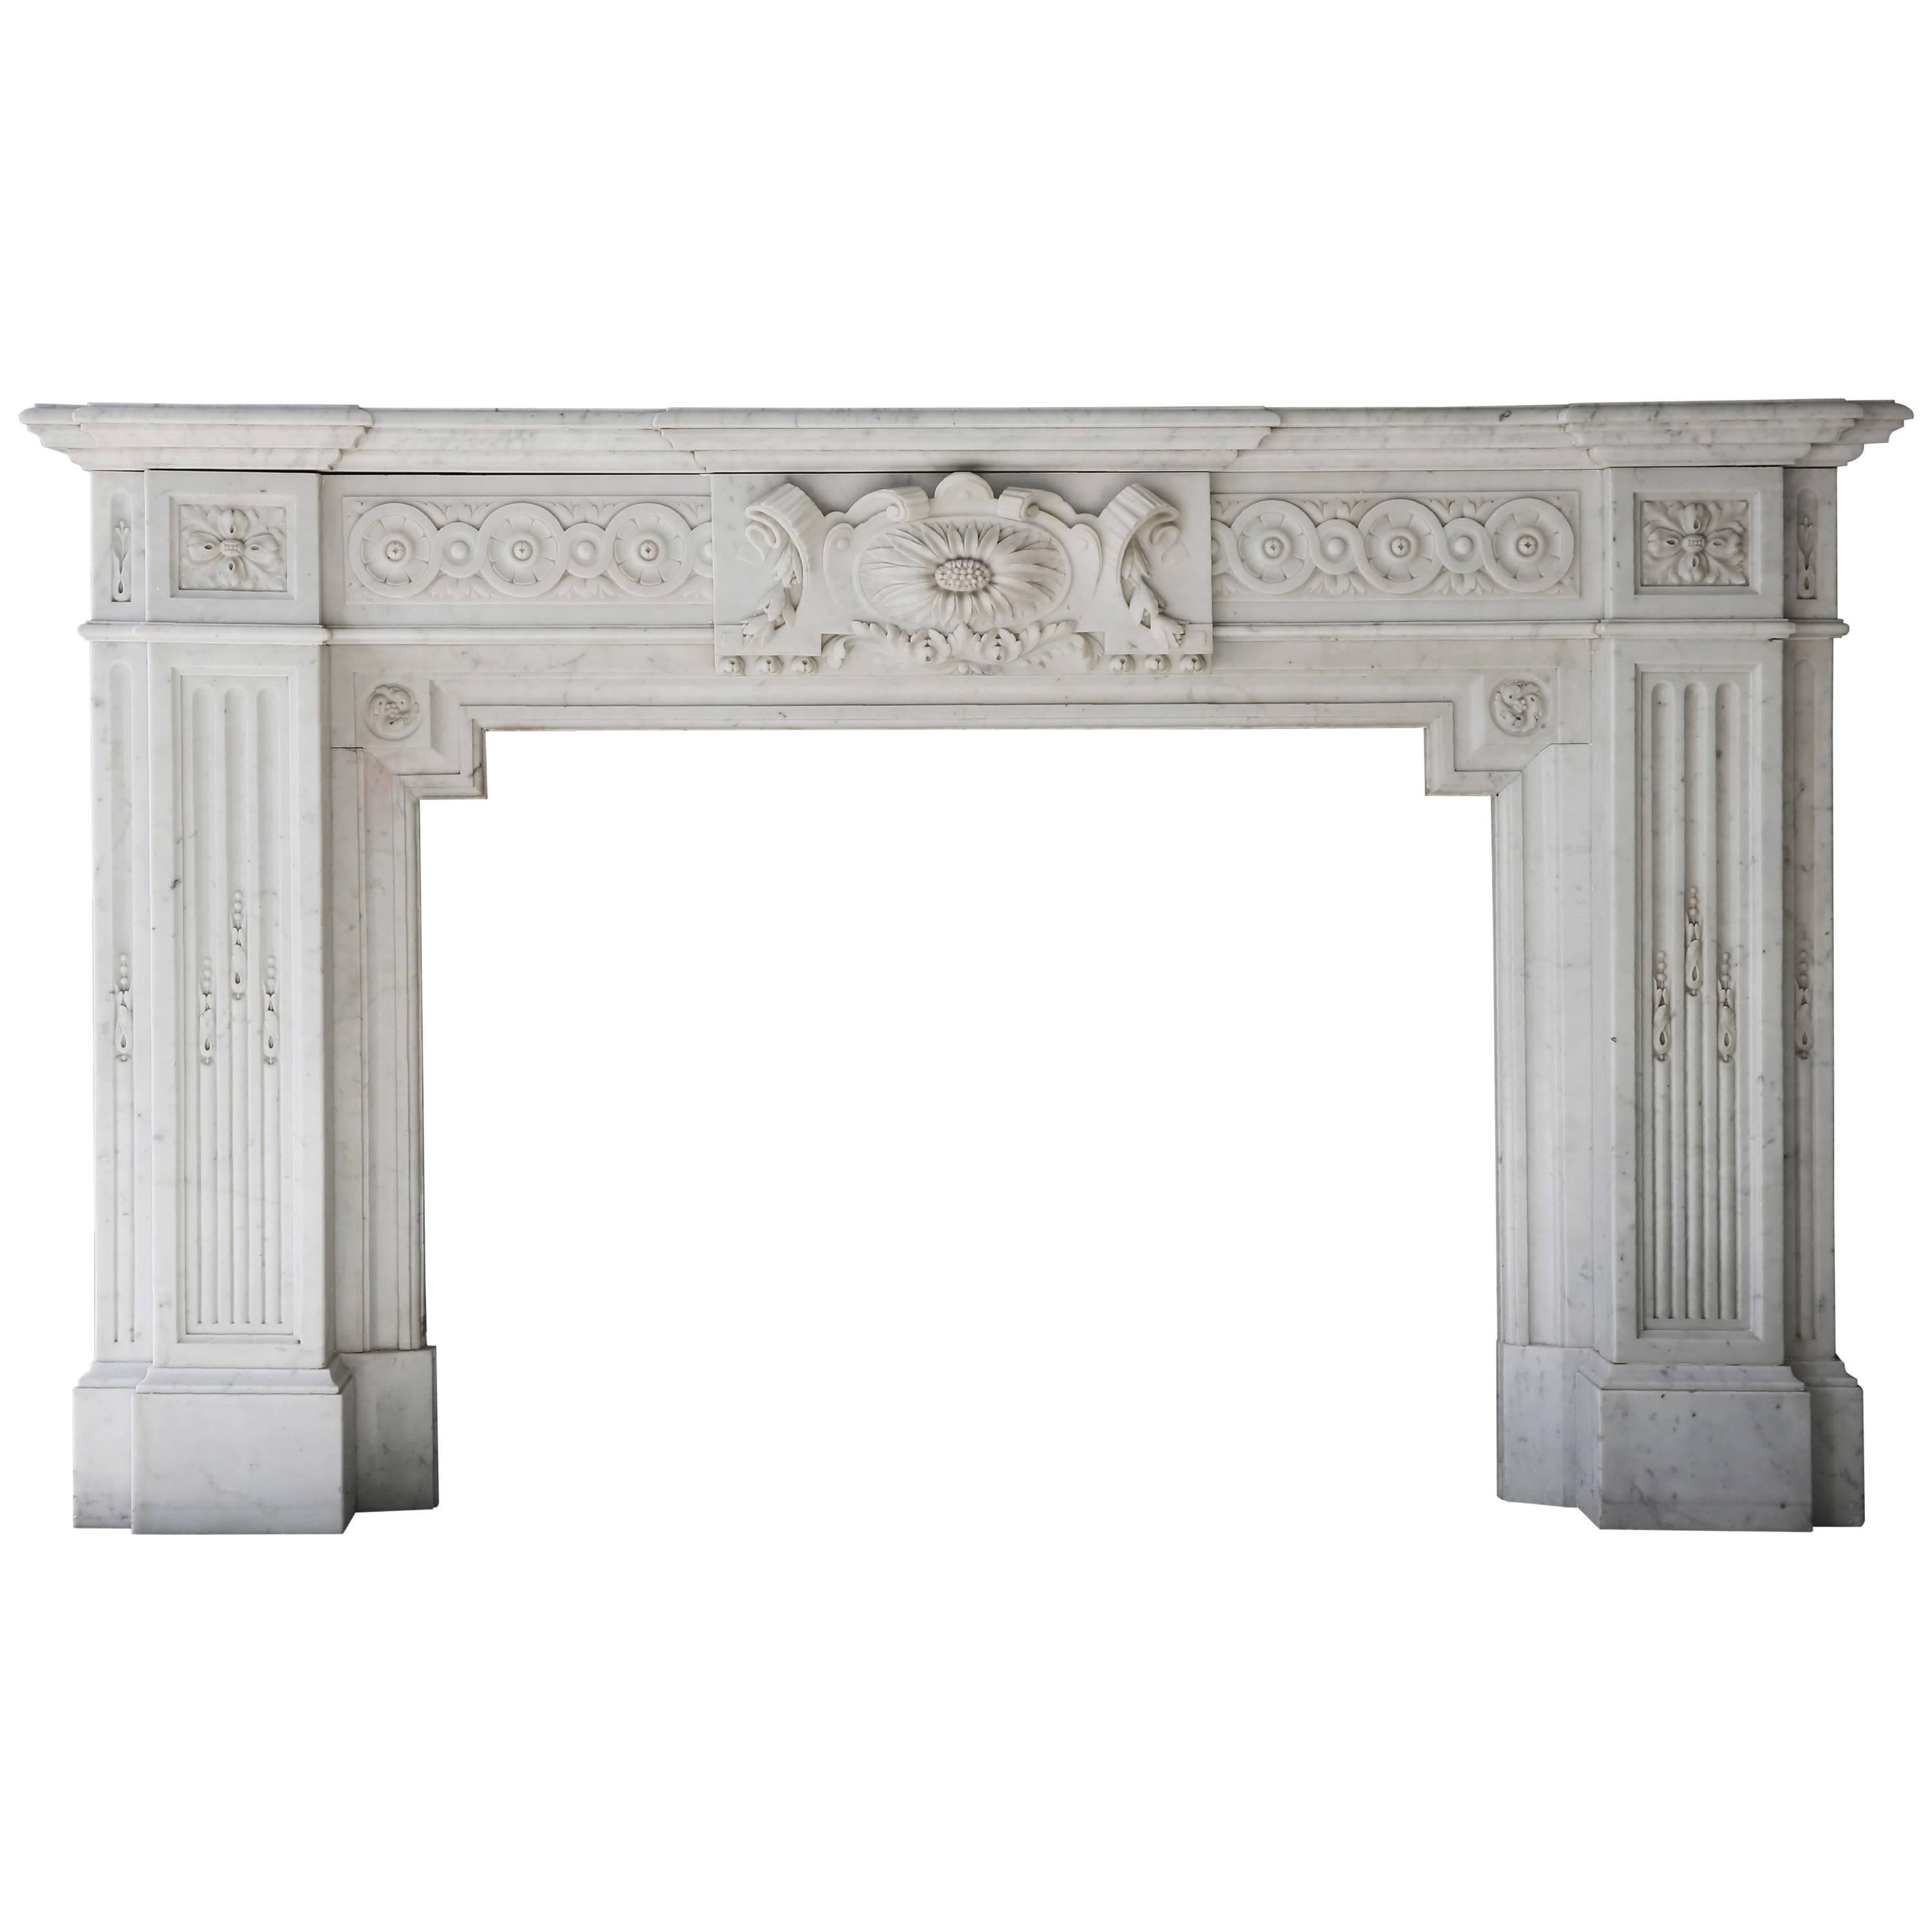 Unique Fireplace of Carrara Marble in Neoclassical Style from the 19th Century